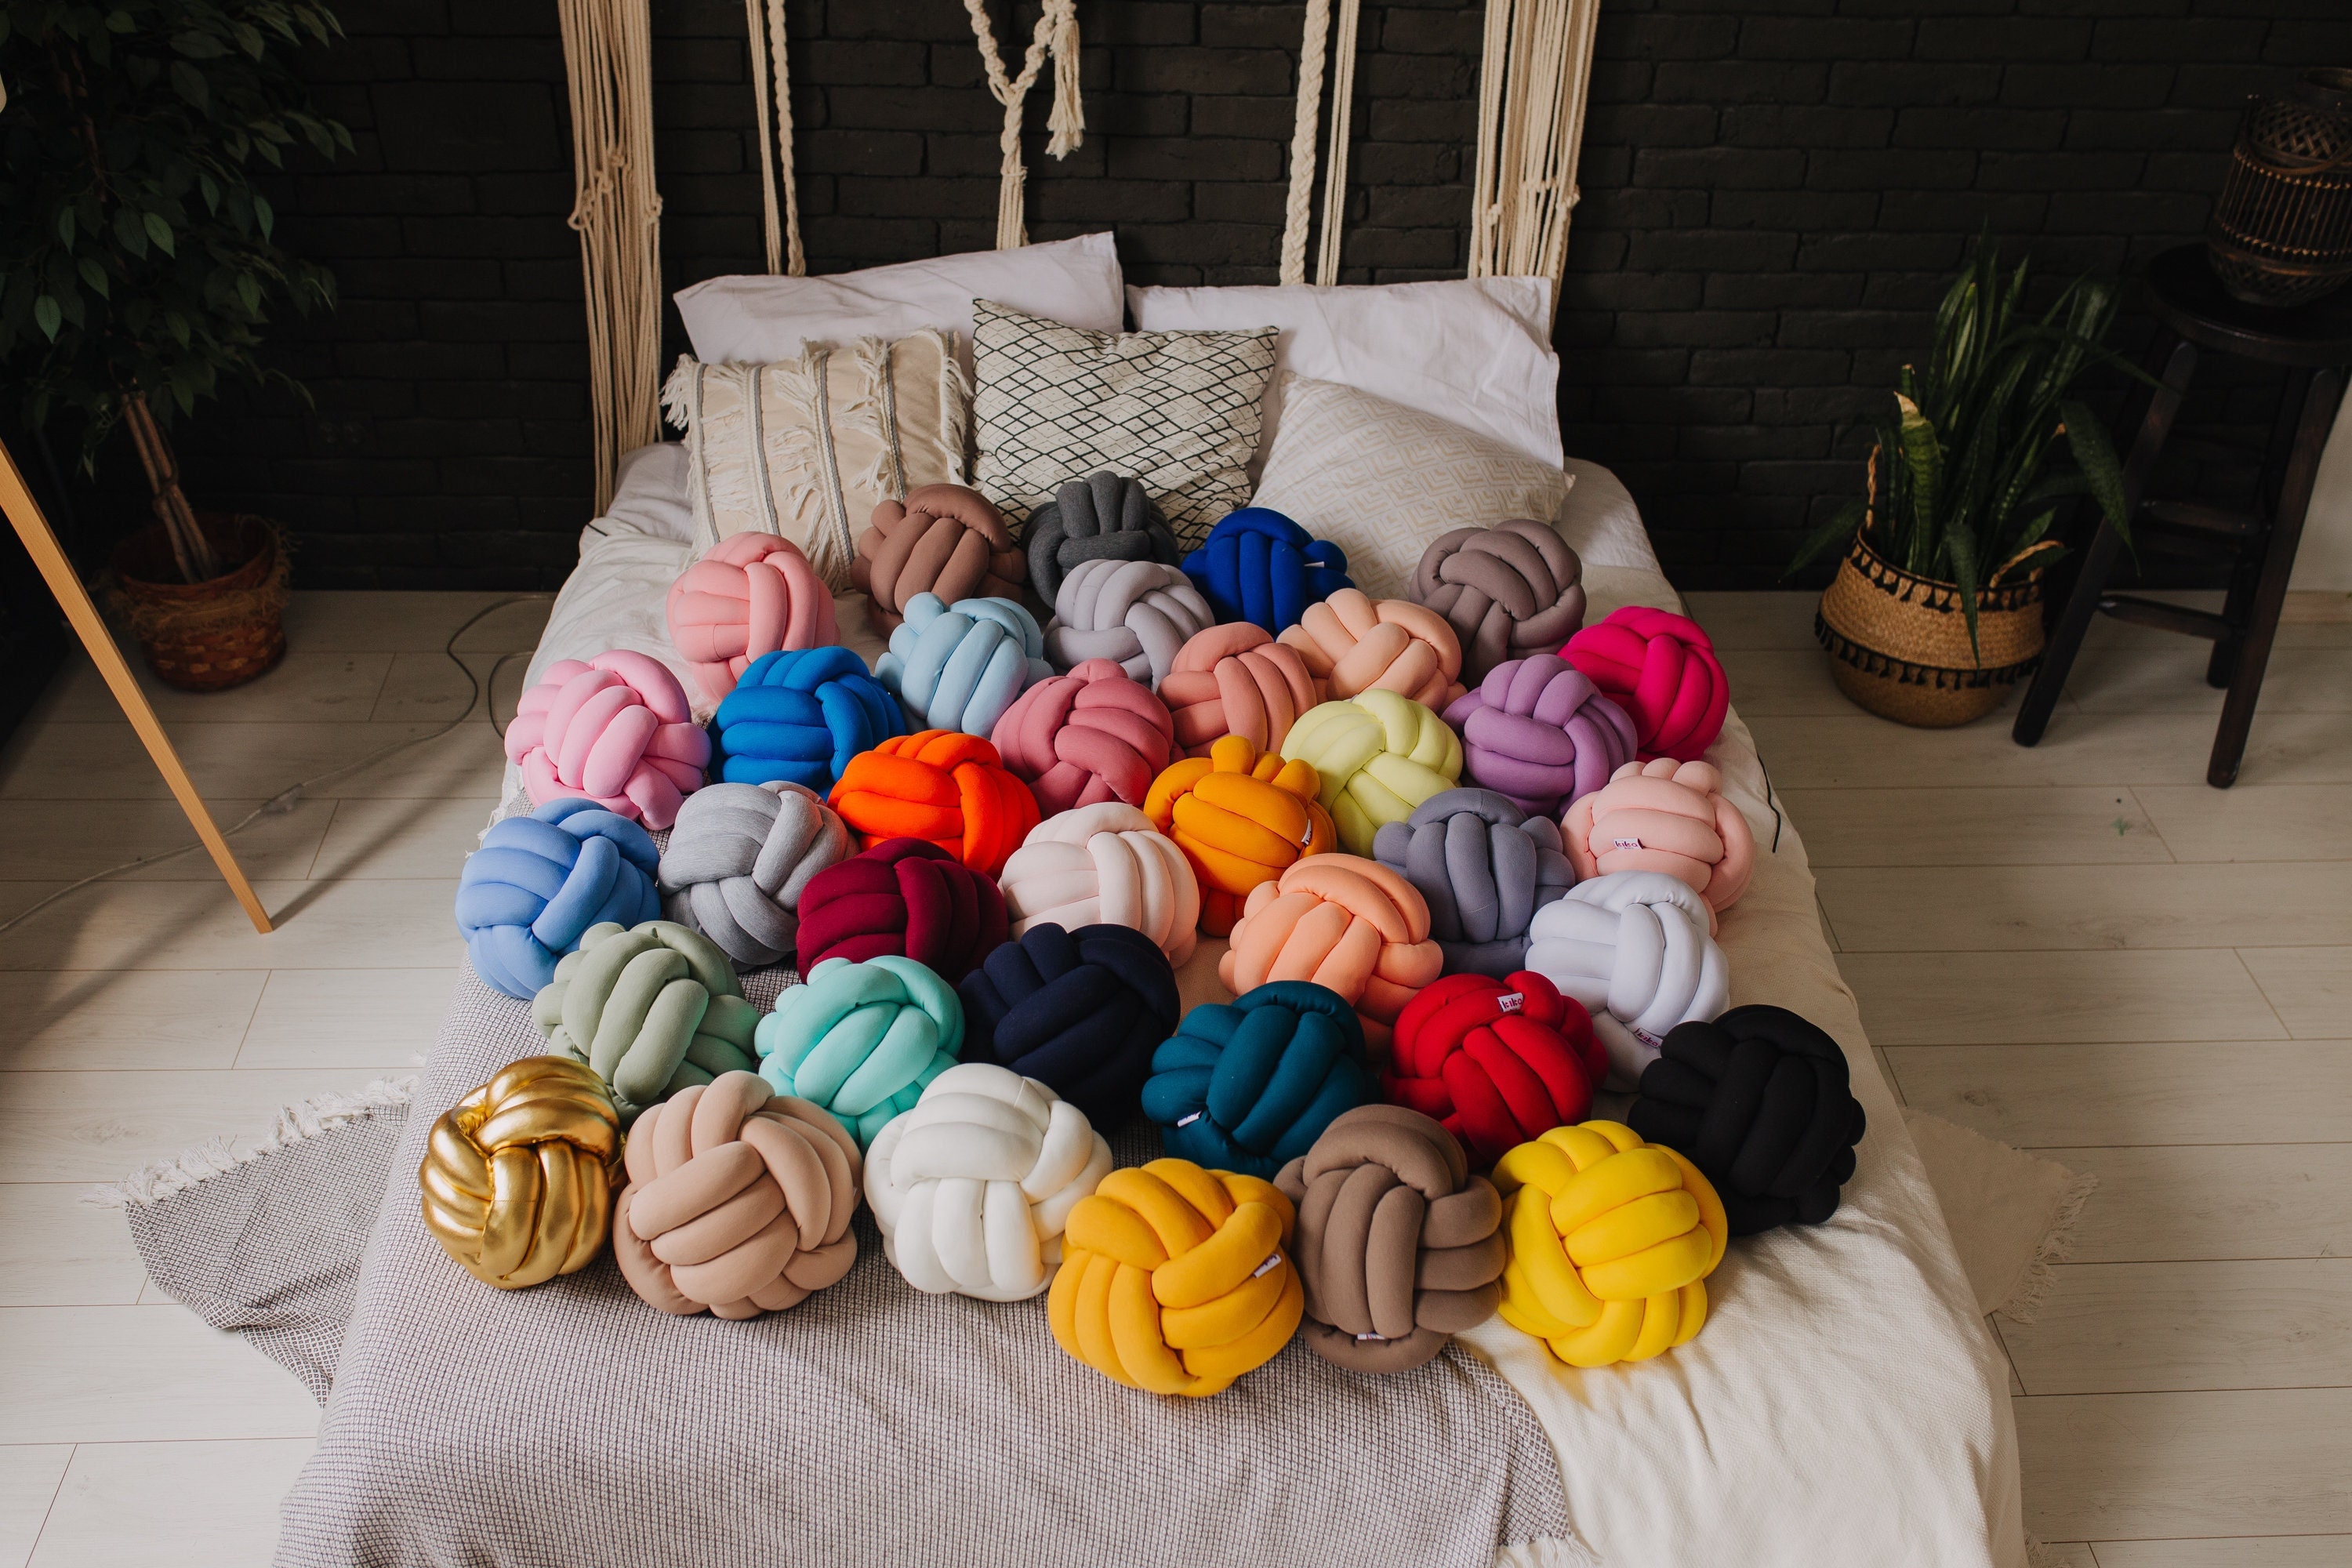 Knot Pillow Ball,Soft Plusch Knotted Round Pillows for Sensory Stress  Relieving, Aesthetic & Cute Small Decorative Throw Cushion for Bed, Floor